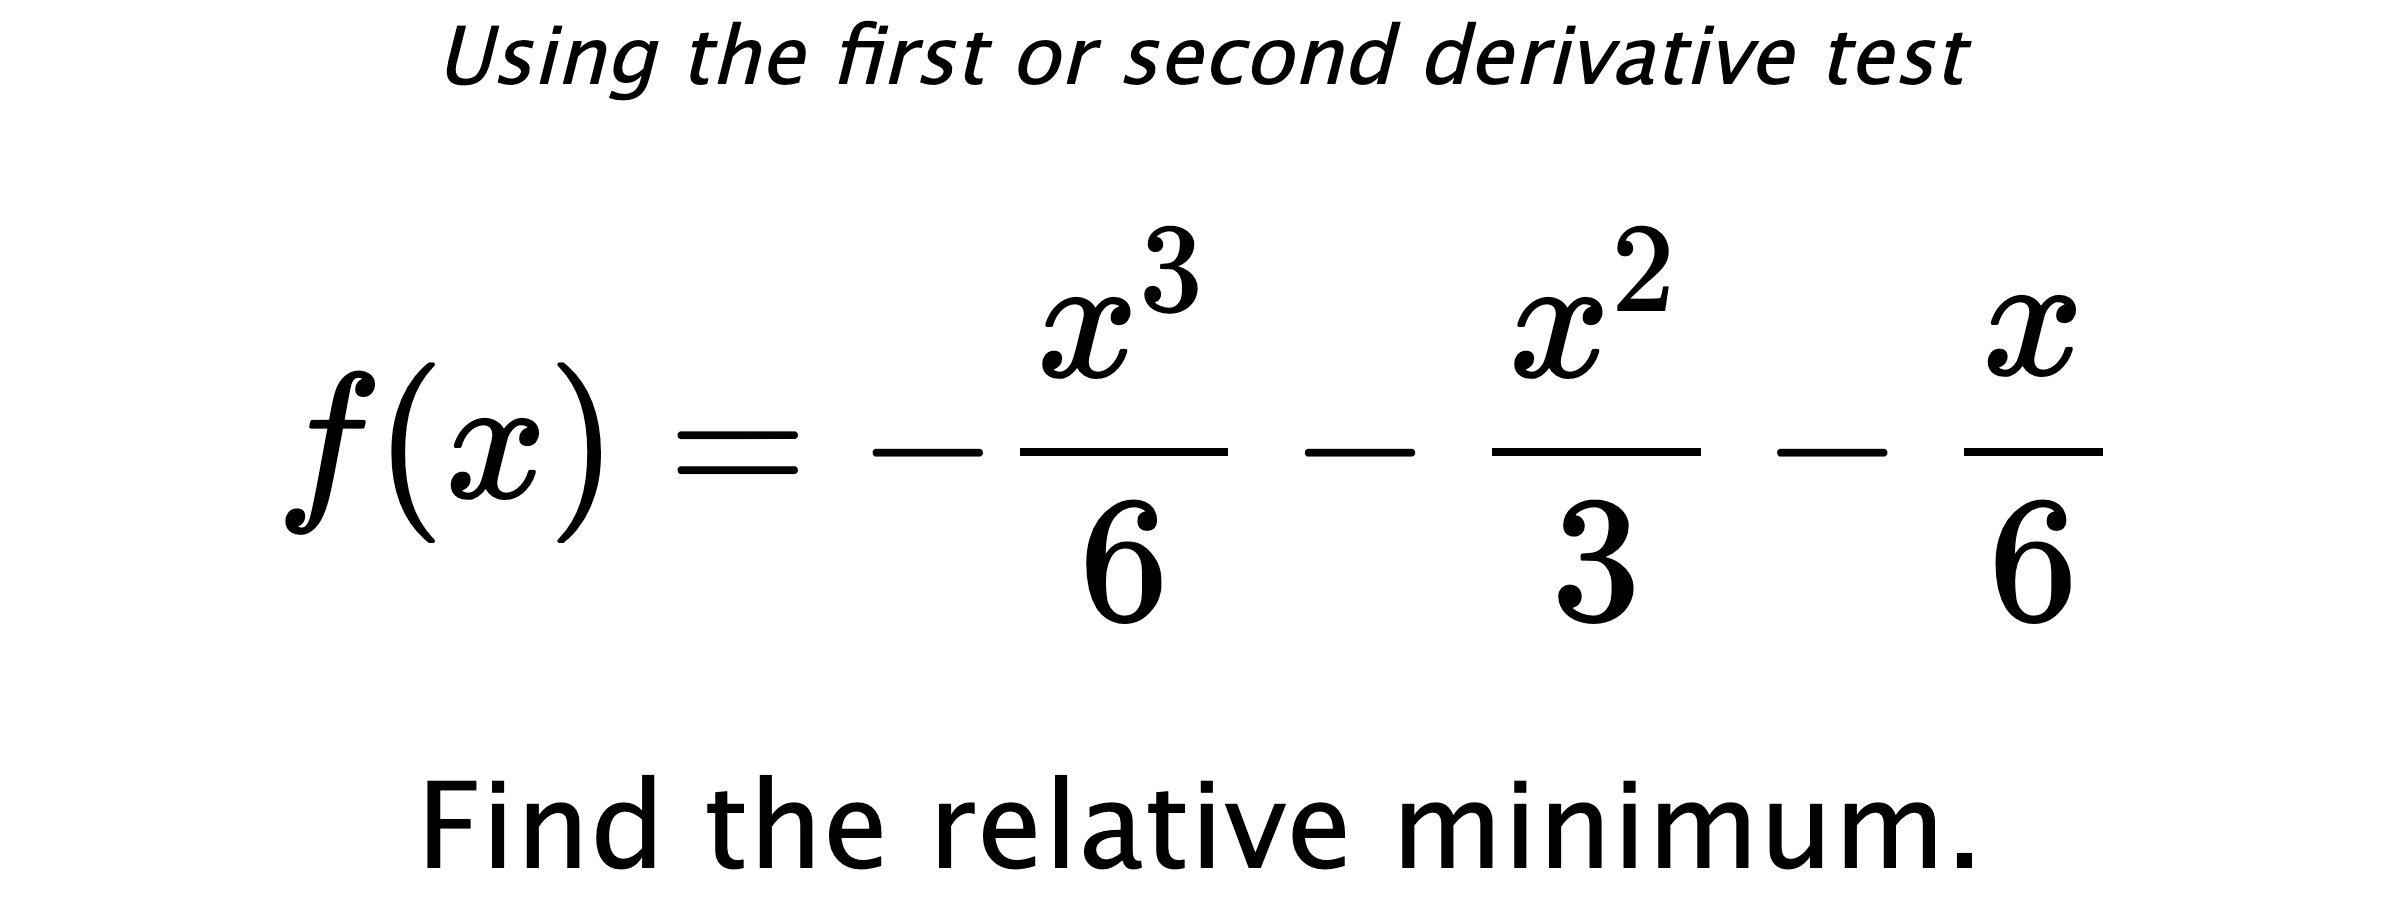 Using the first or second derivative test $$ f(x)=-\frac{x^3}{6}-\frac{x^2}{3}-\frac{x}{6} $$ Find the relative minimum.